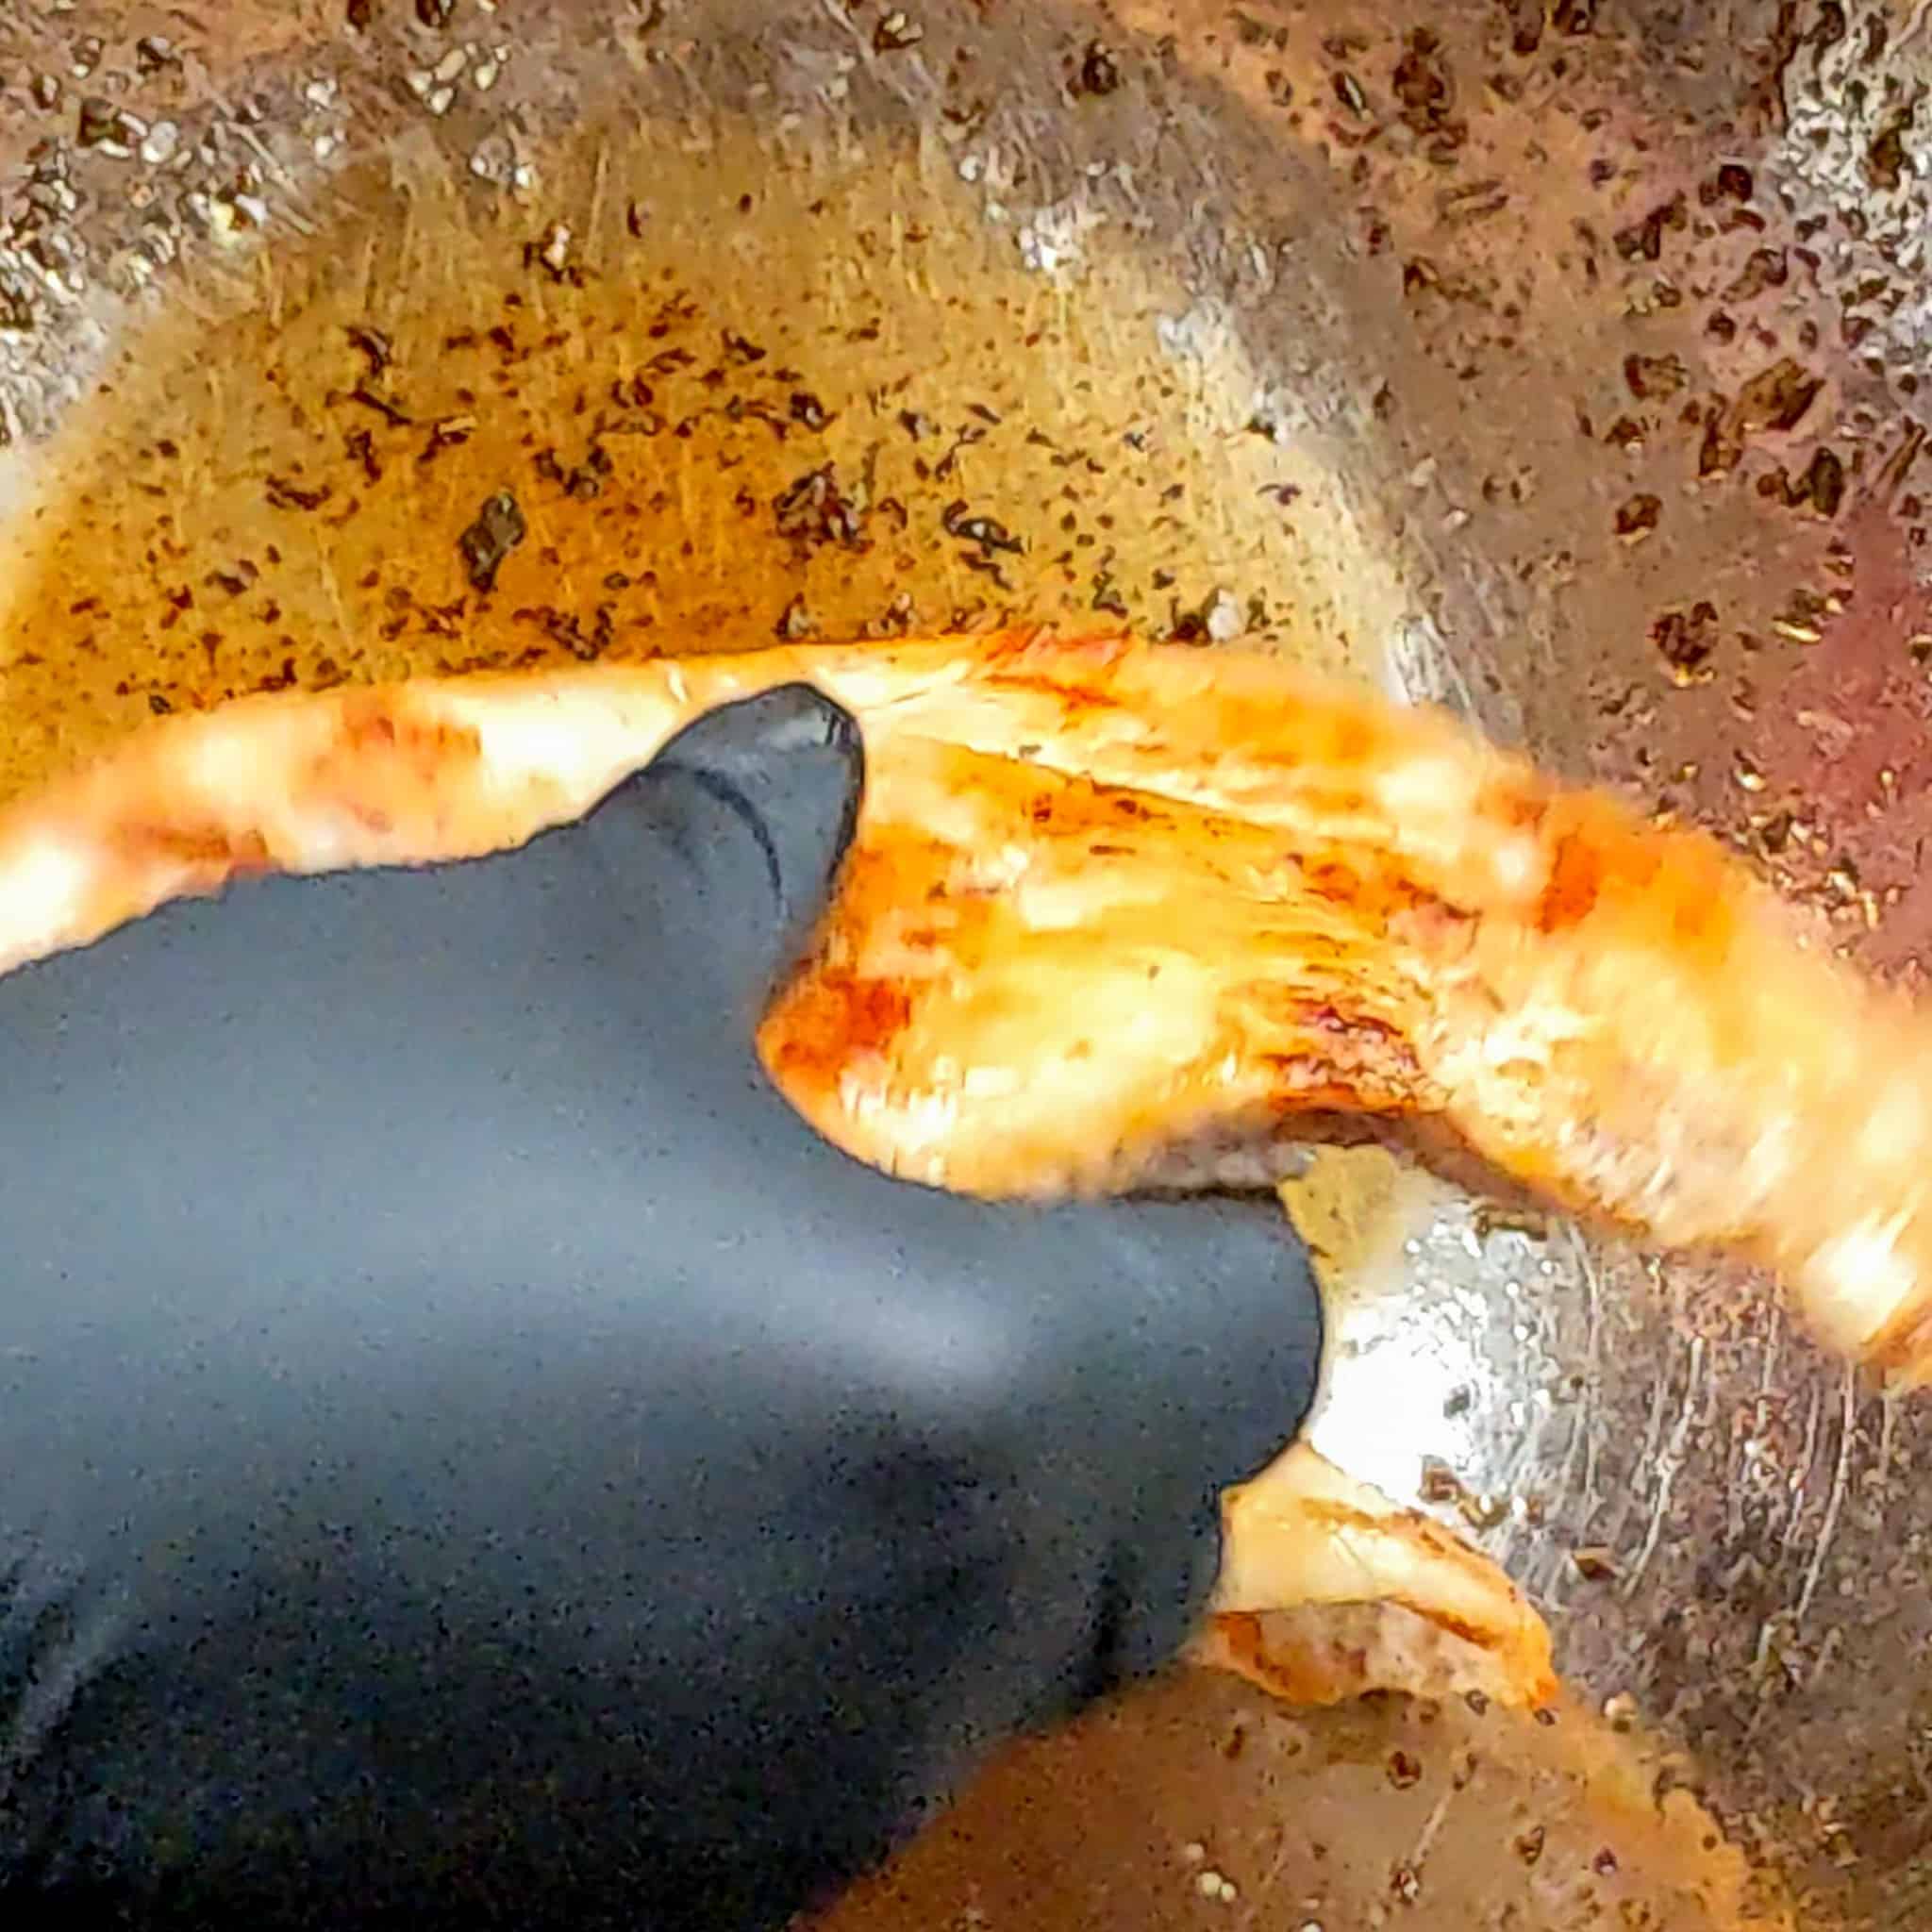 a gloved hand about to place a seared cooked seasoned chicken breast in a large mixing bowl of maple syrup sauce